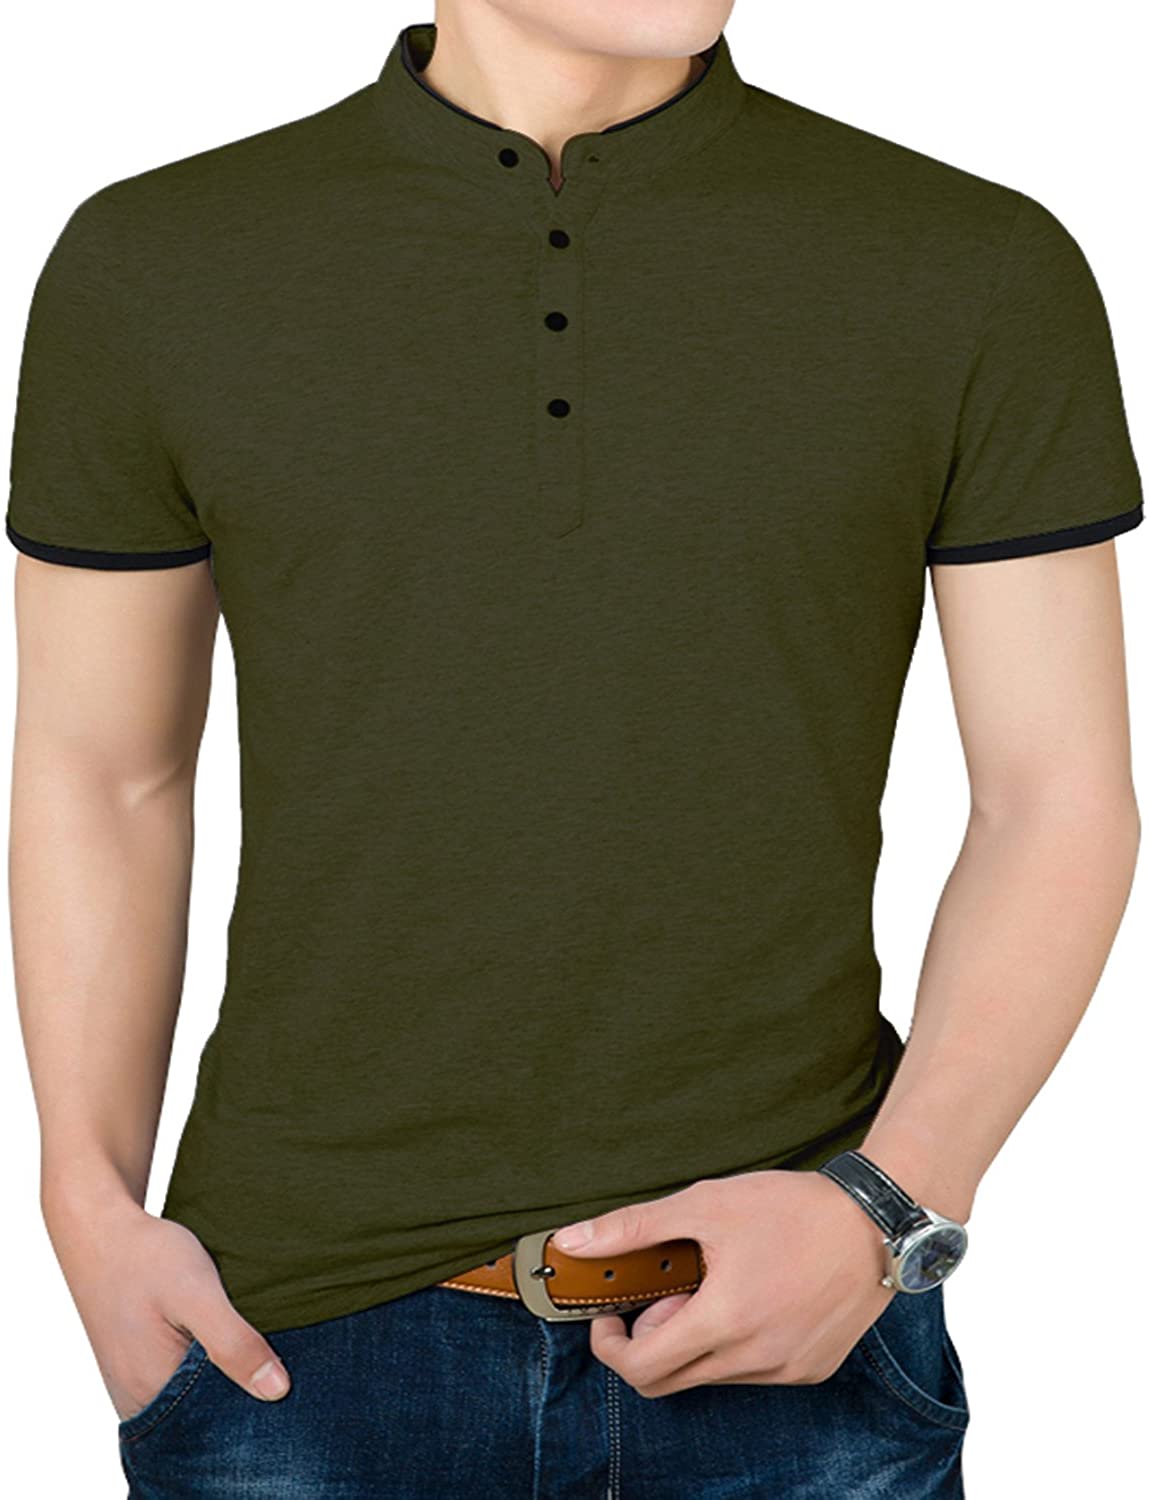 YTD Mens Summer Slim Fit Pure Color Short Sleeve Polo Casual T-Shirts